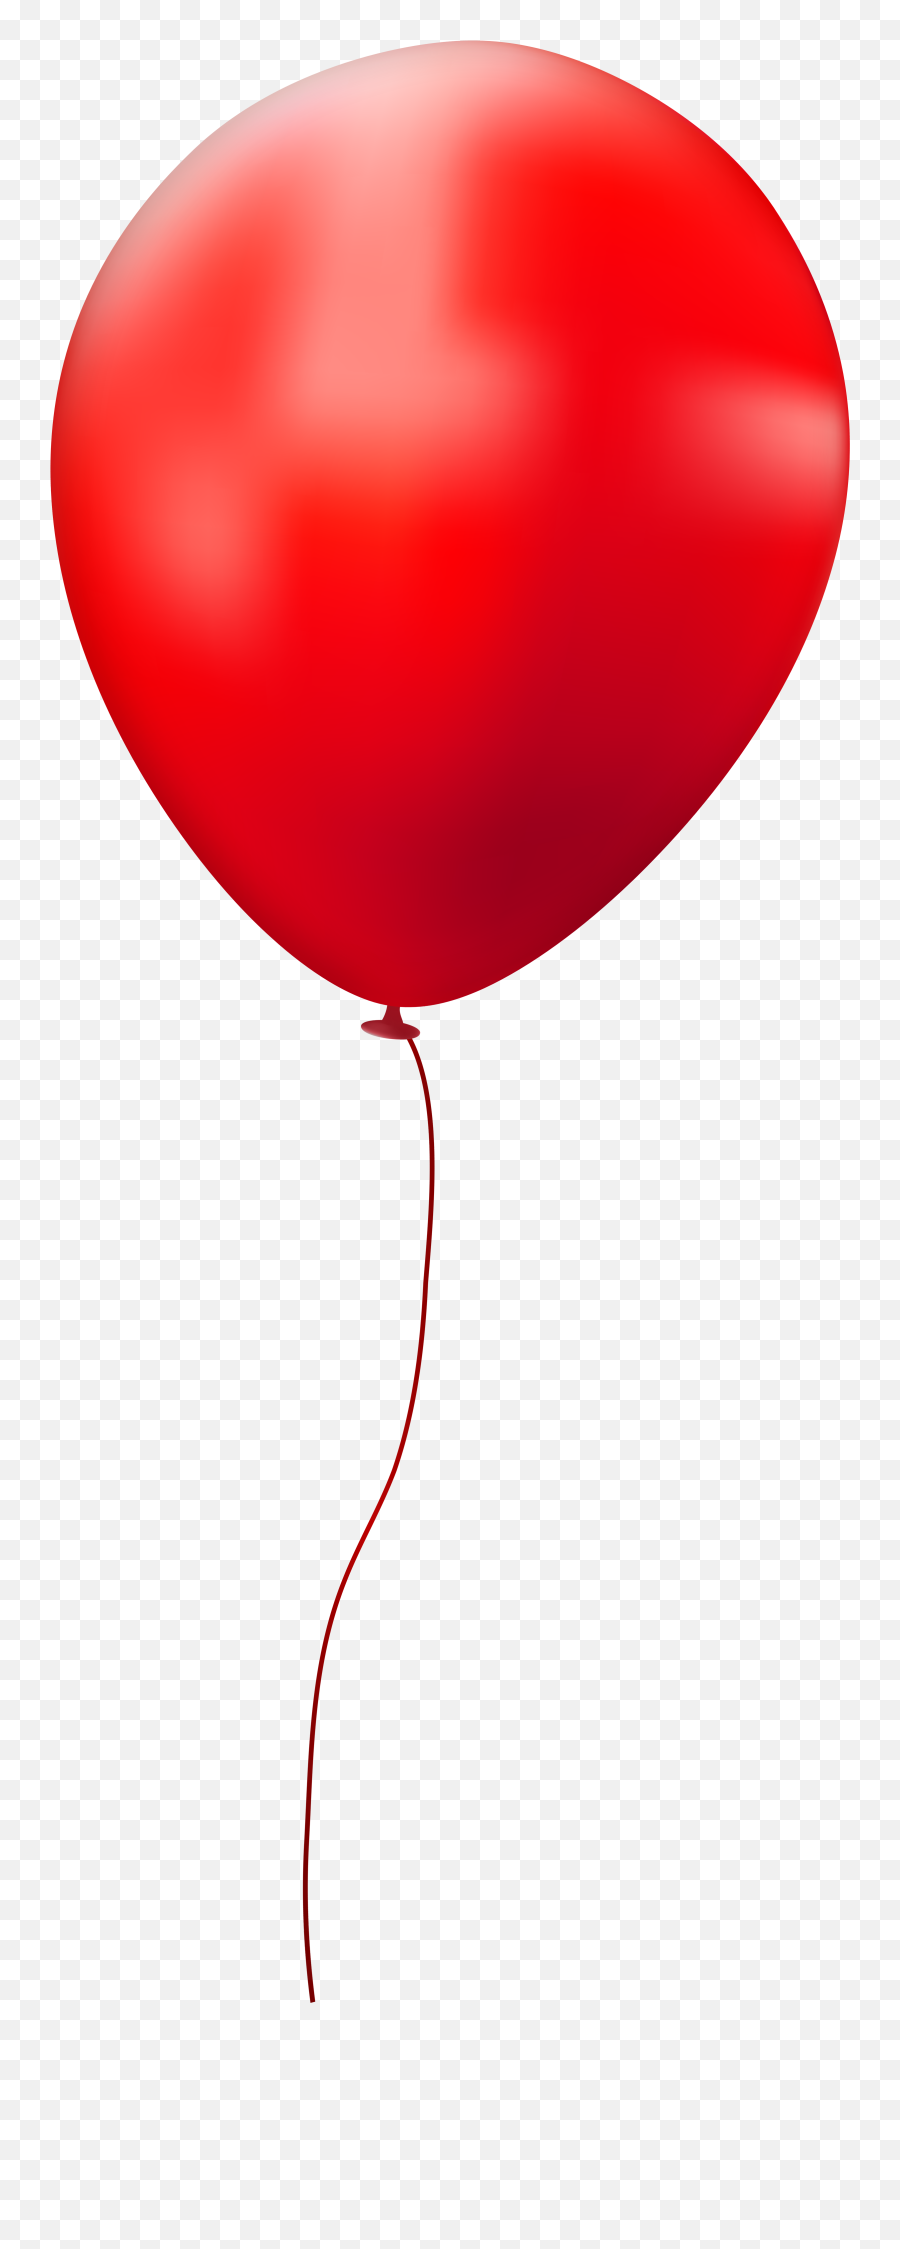 4 Clipart Single Balloon - Transparent Red Balloon Png Background Clipart Transparent Transparent Background Red Balloon Png,Balloon Clipart Transparent Background